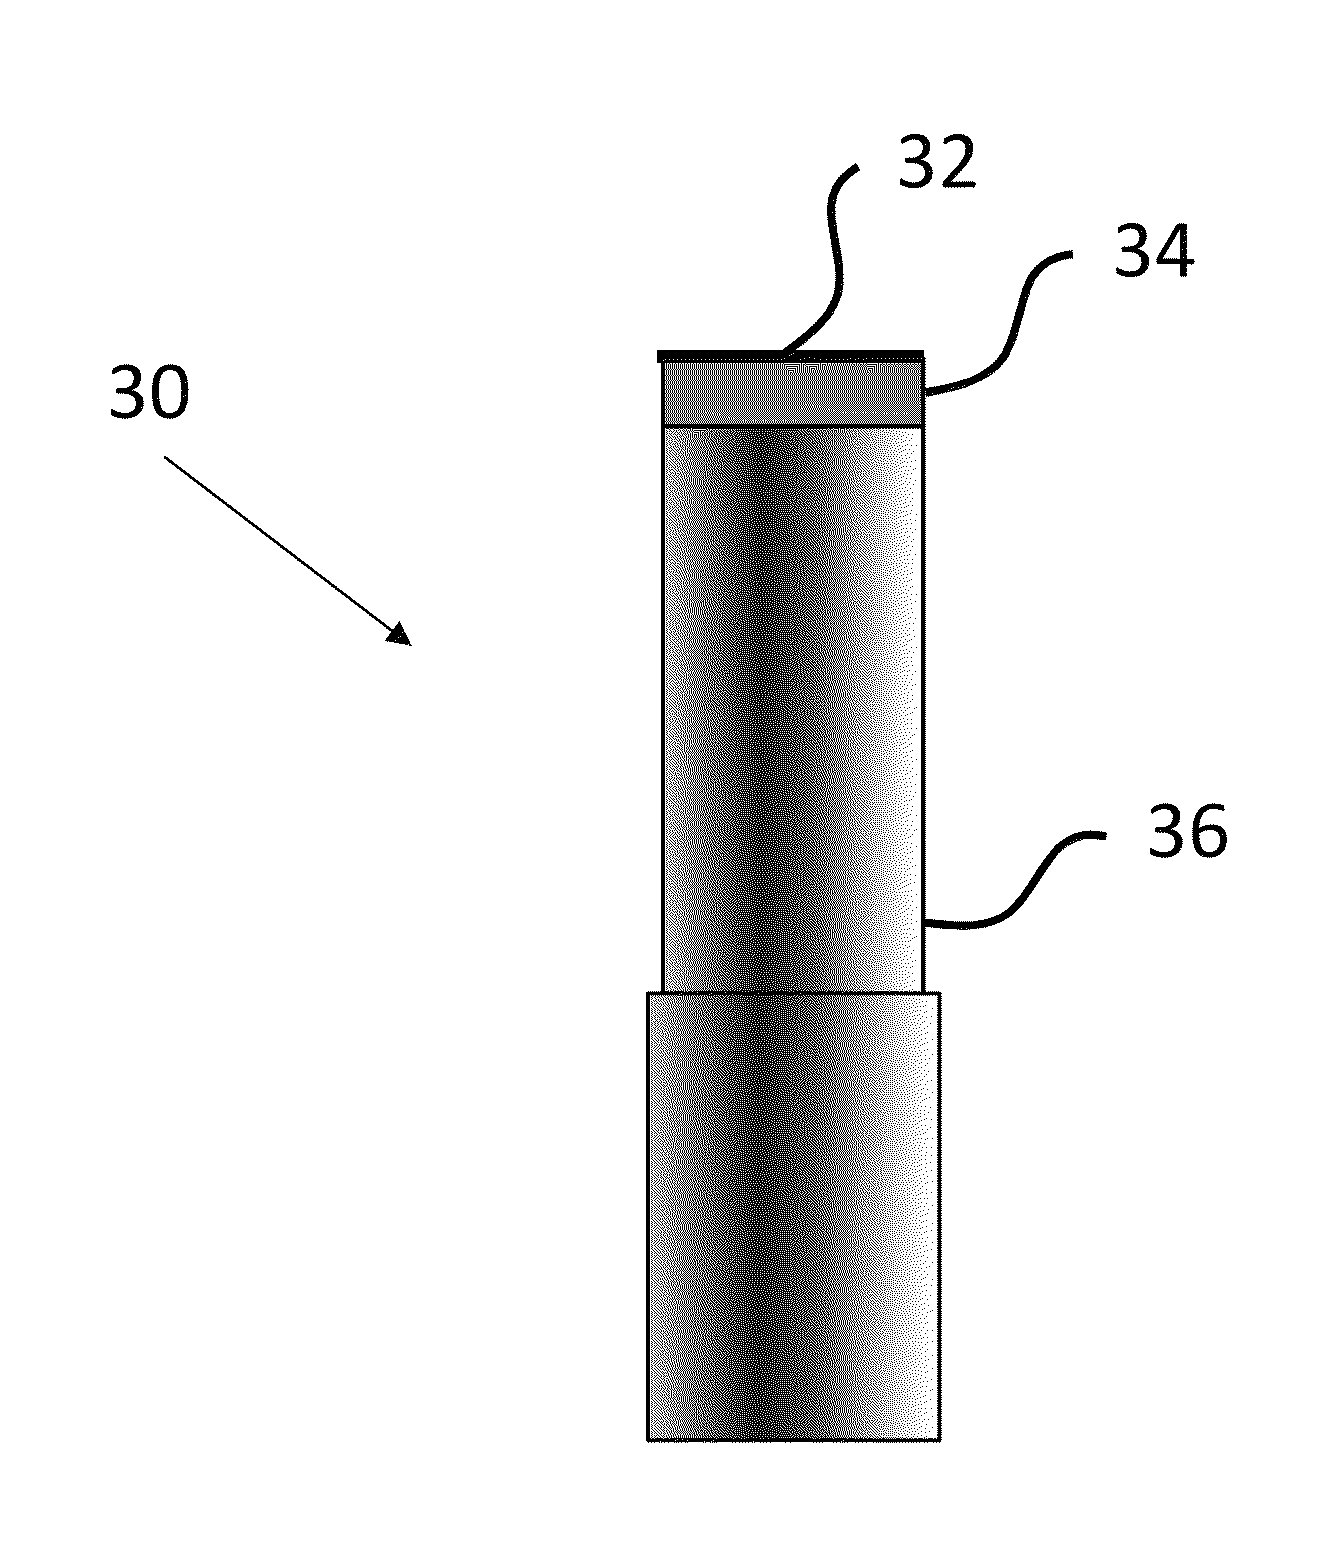 Probe and method of manufacture for semiconductor wafer characterization